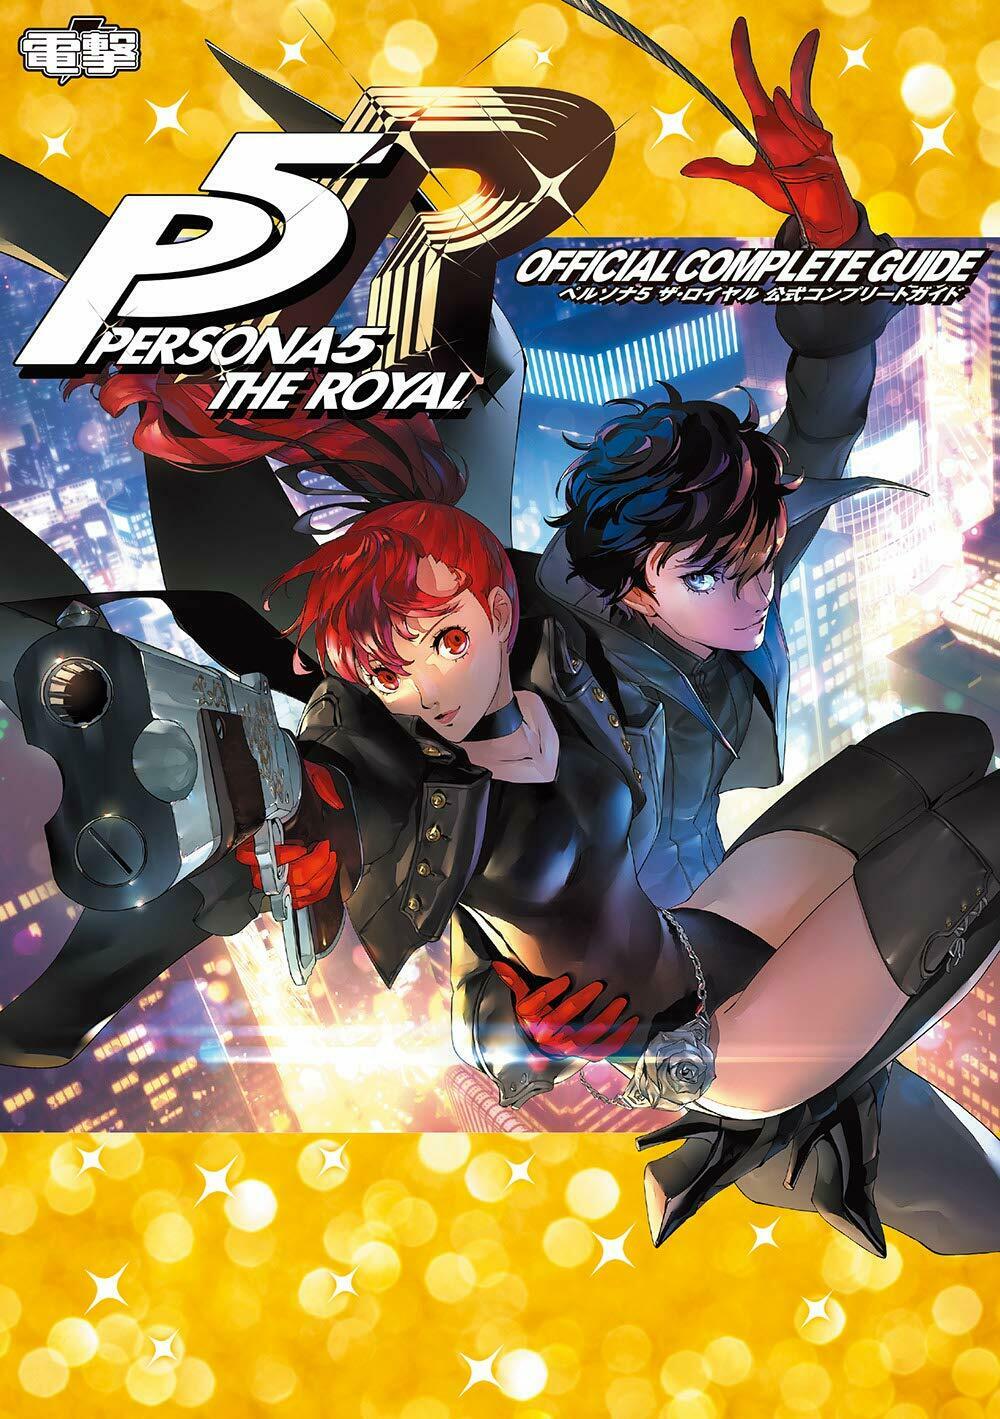 NEW Persona 5 Royal Official Complete Guide Book | JAPAN Game P5R